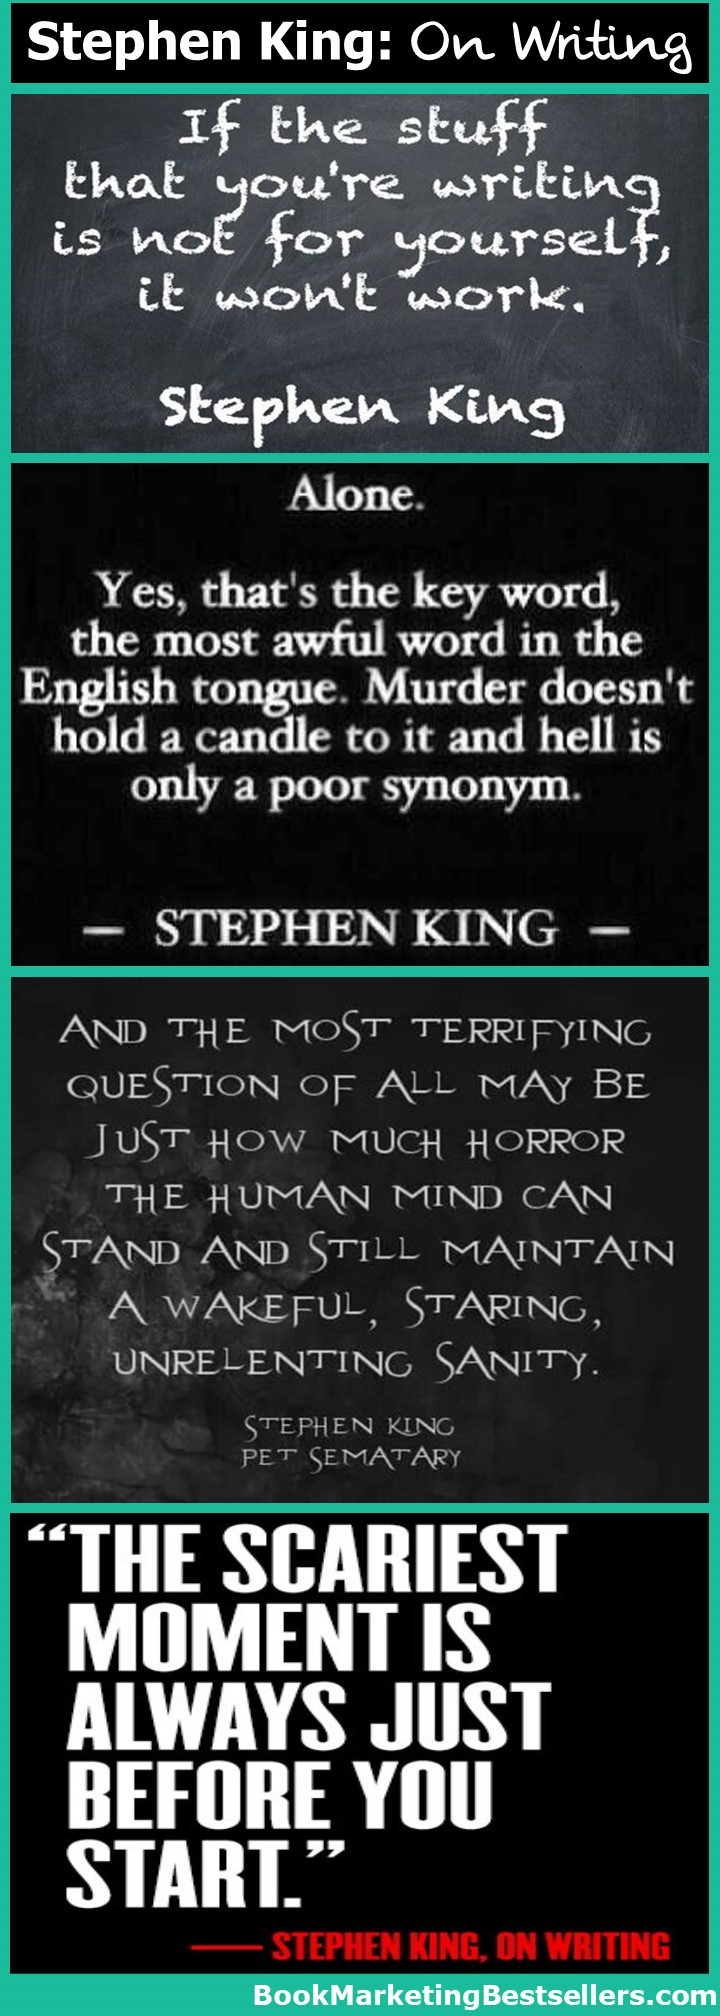 Stephen King on Writing: Here are a few wonderful quotations from master storyteller Stephen King on writing and horror presented as a tip-o-graphic. Enjoy these writing quotes.